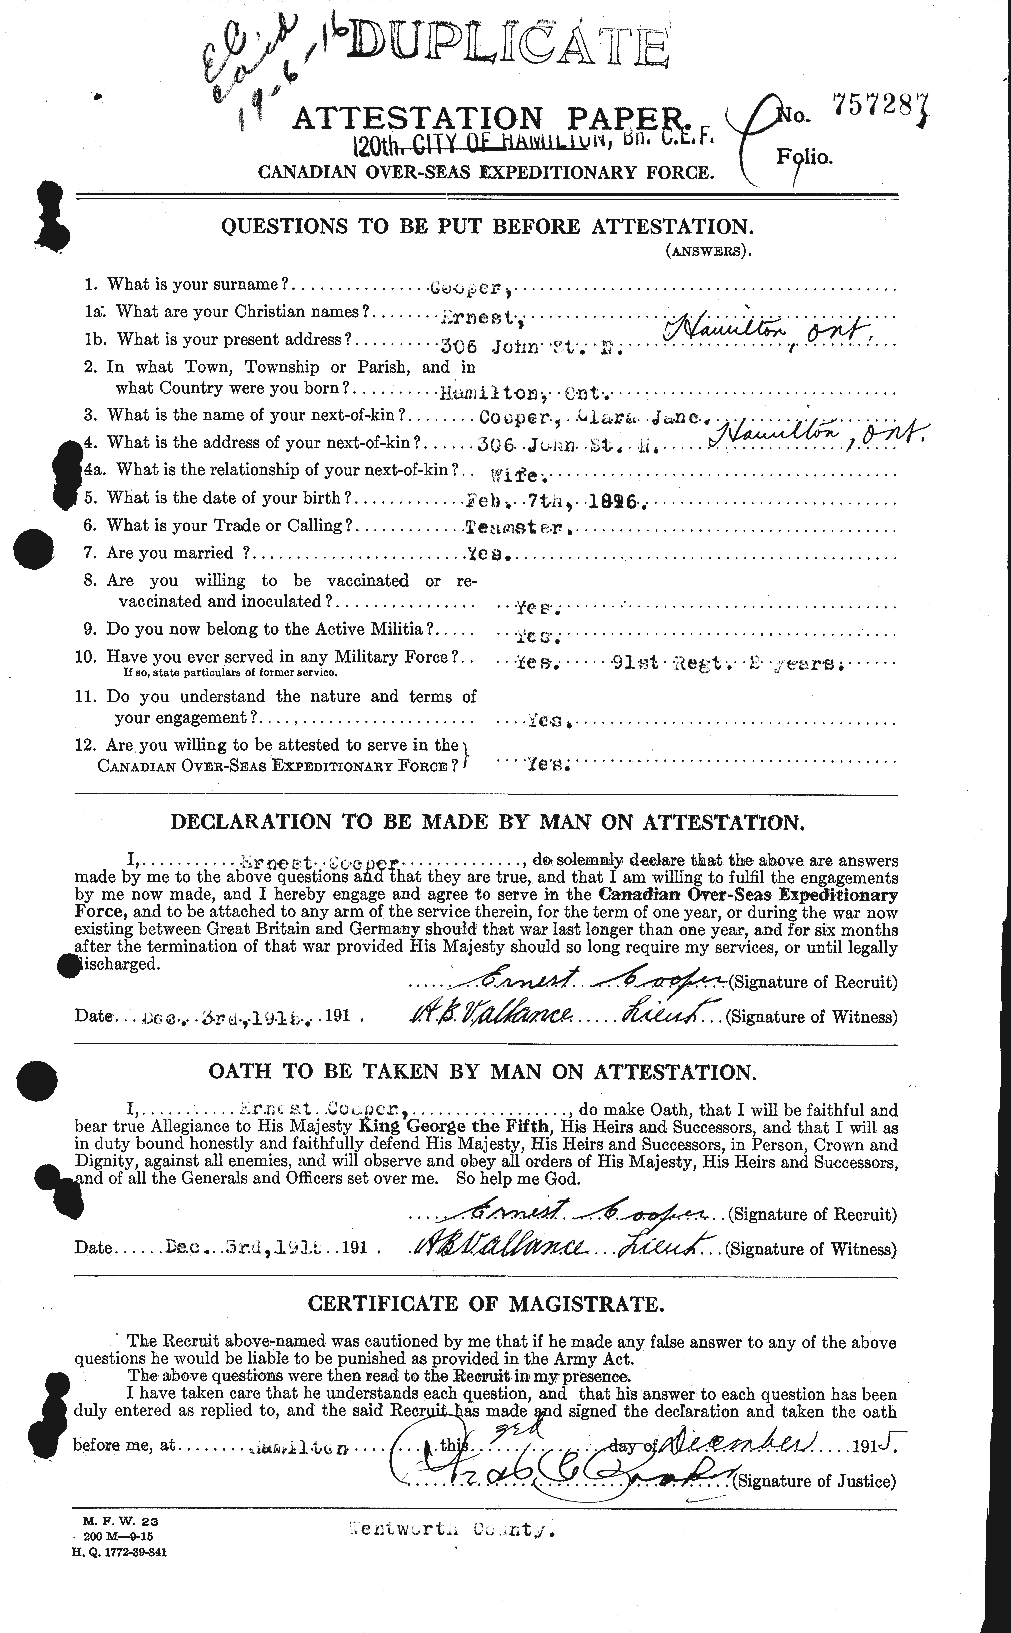 Personnel Records of the First World War - CEF 058484a